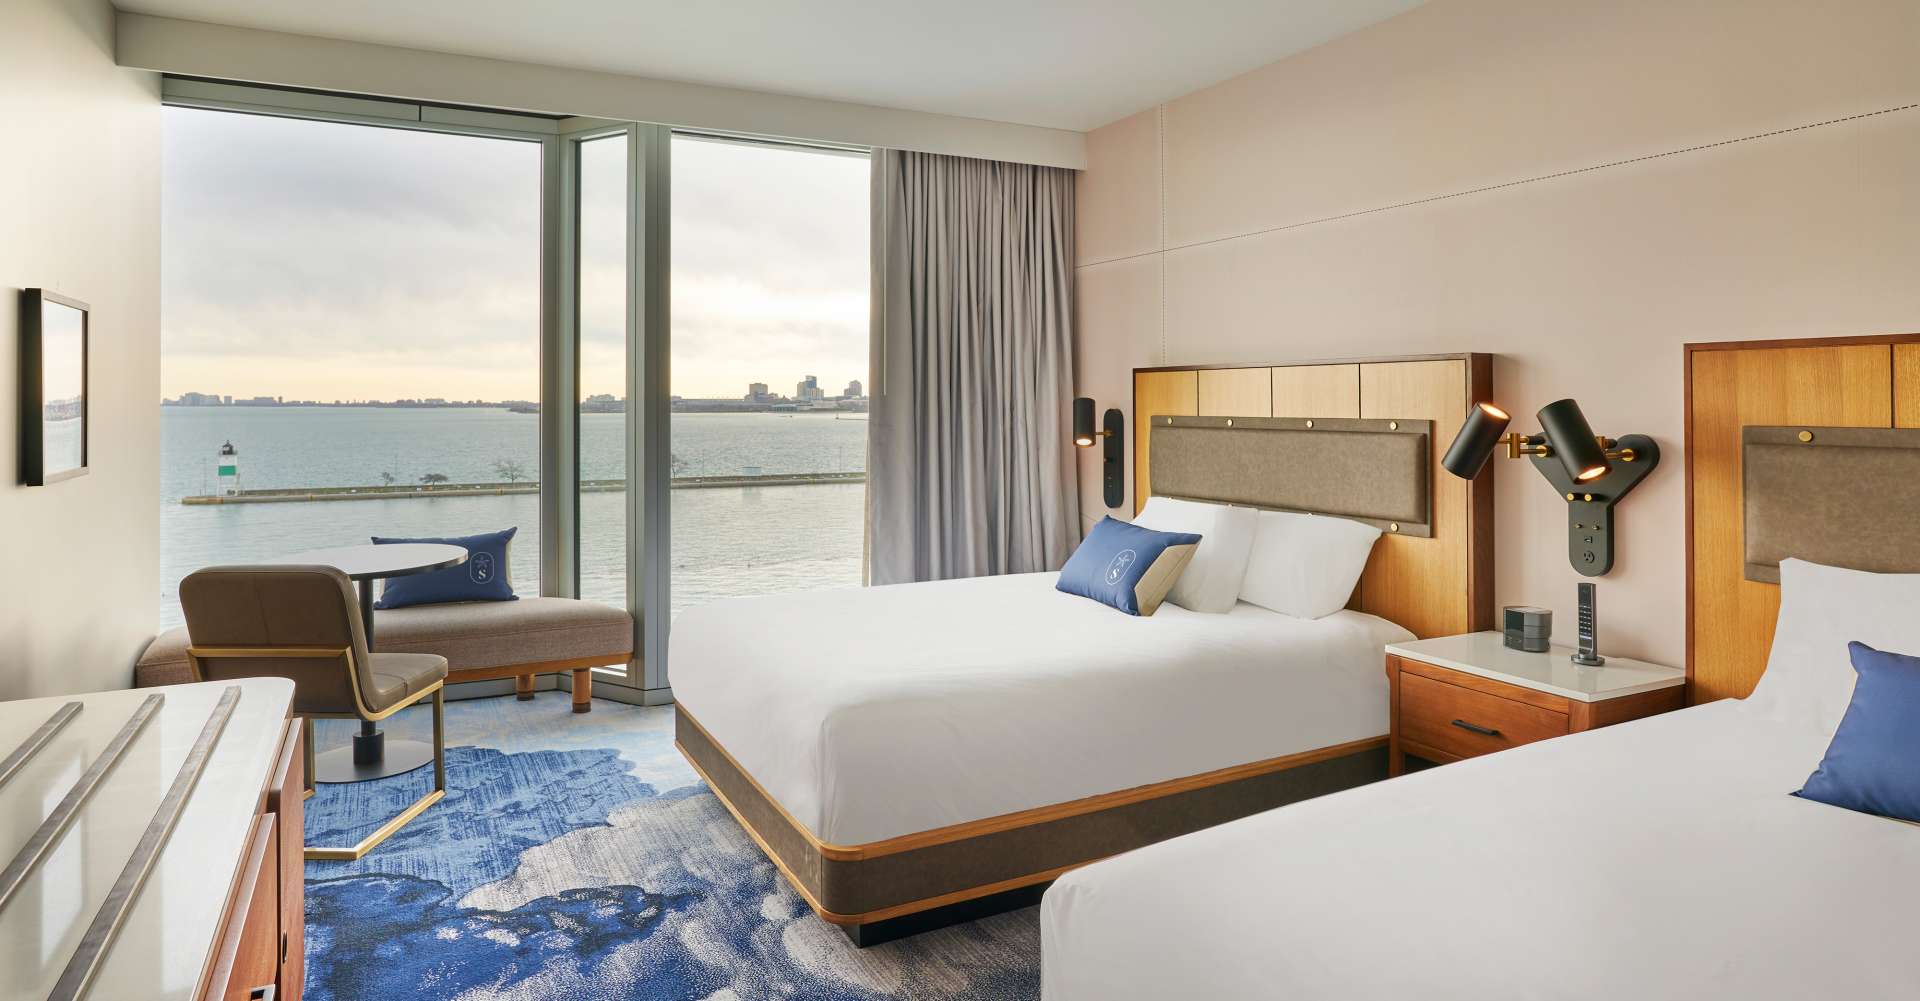 july 4th hotel deal sable navy pier double queen bed 